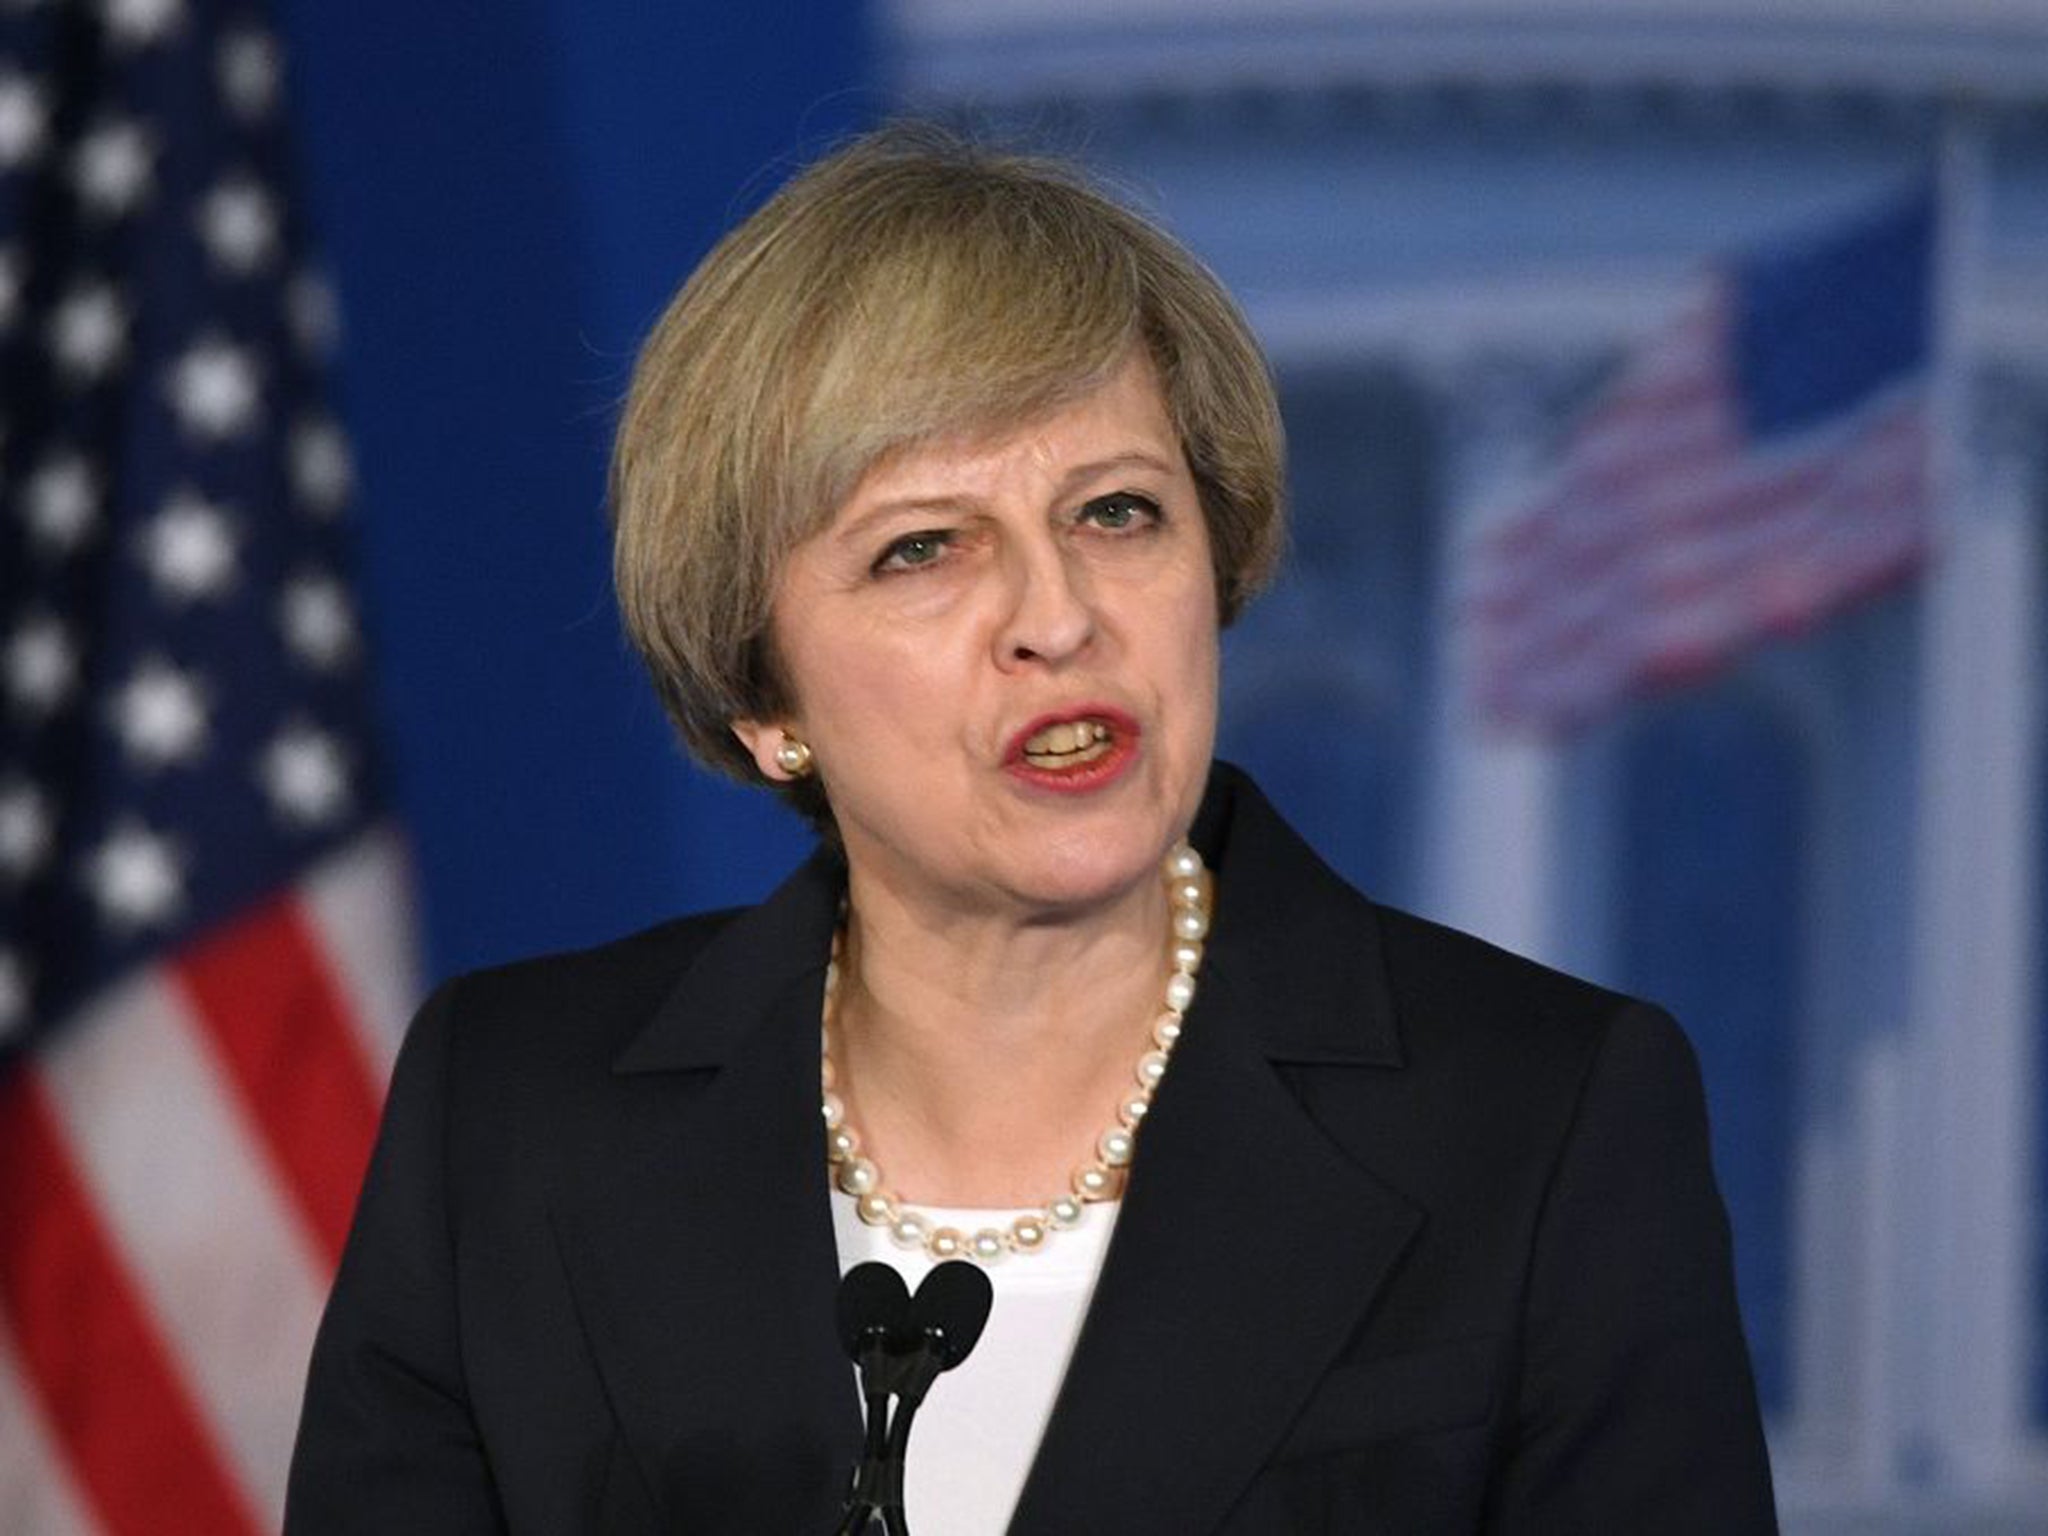 The Prime Minister said pushing back on 'Iran’s aggressive efforts' to increase its influence was a 'priority'